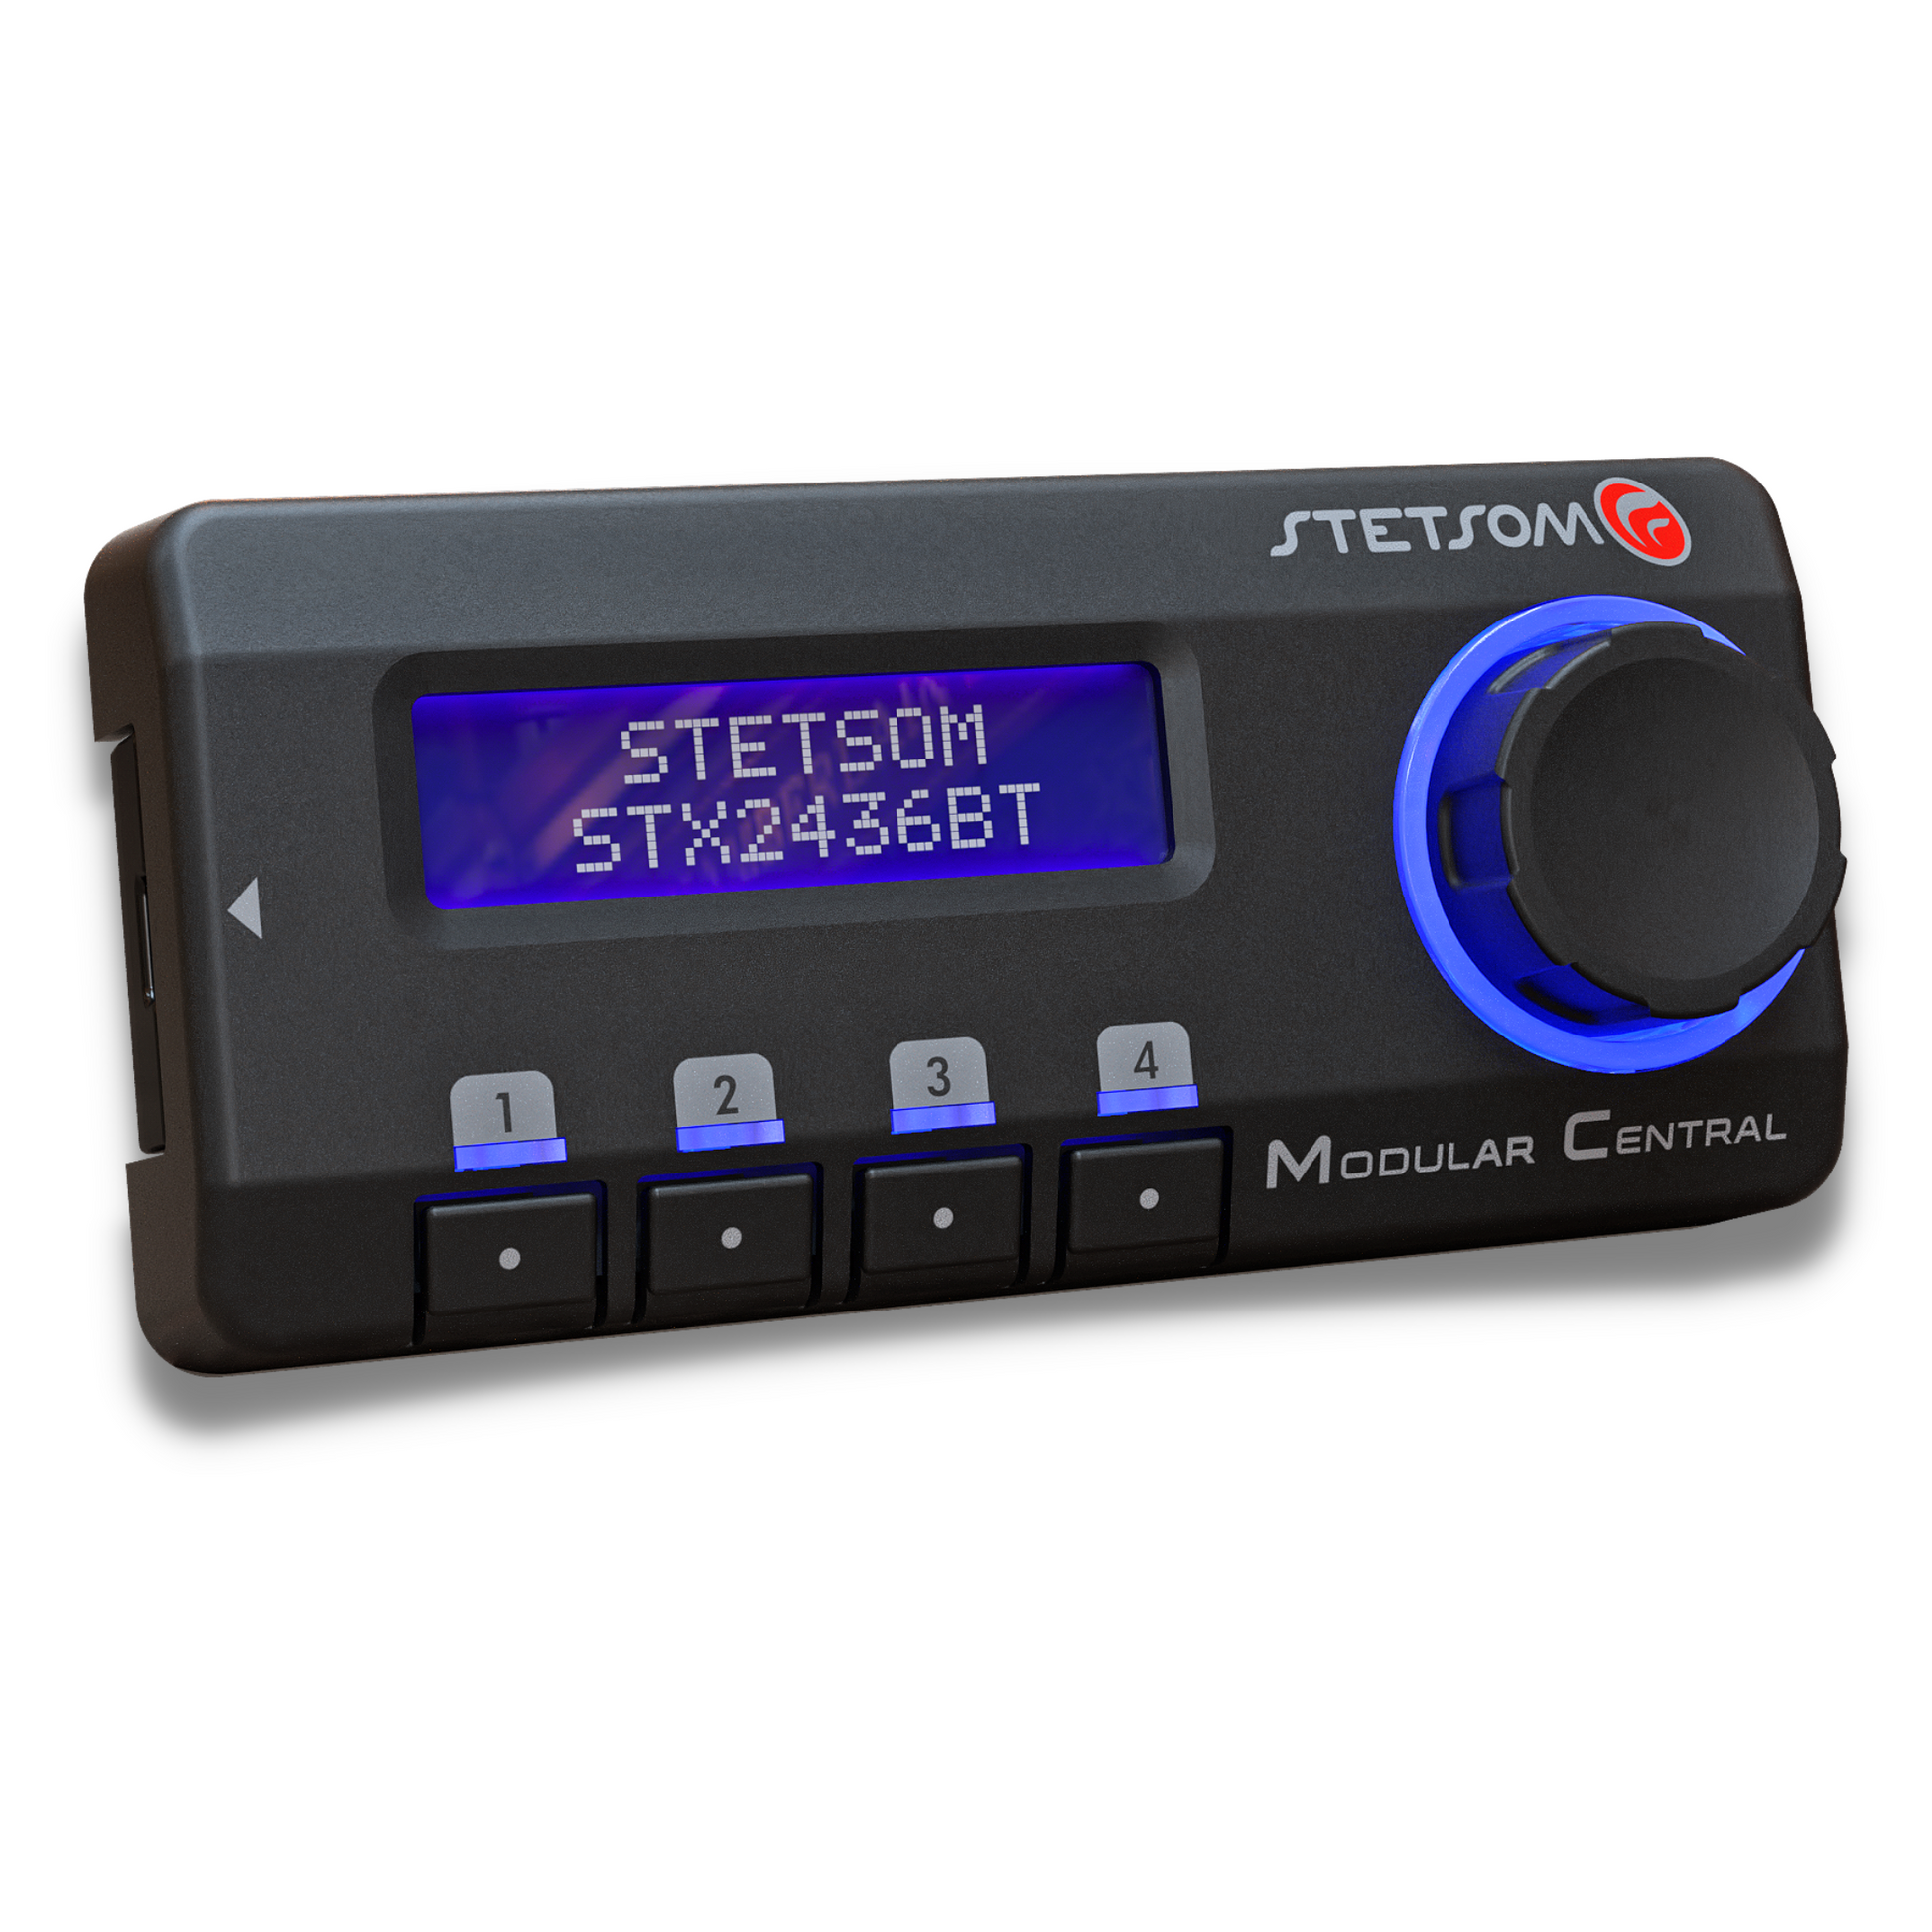 Stetsom Modular Central - SMC Remote Controller for Stetsom DSP Products